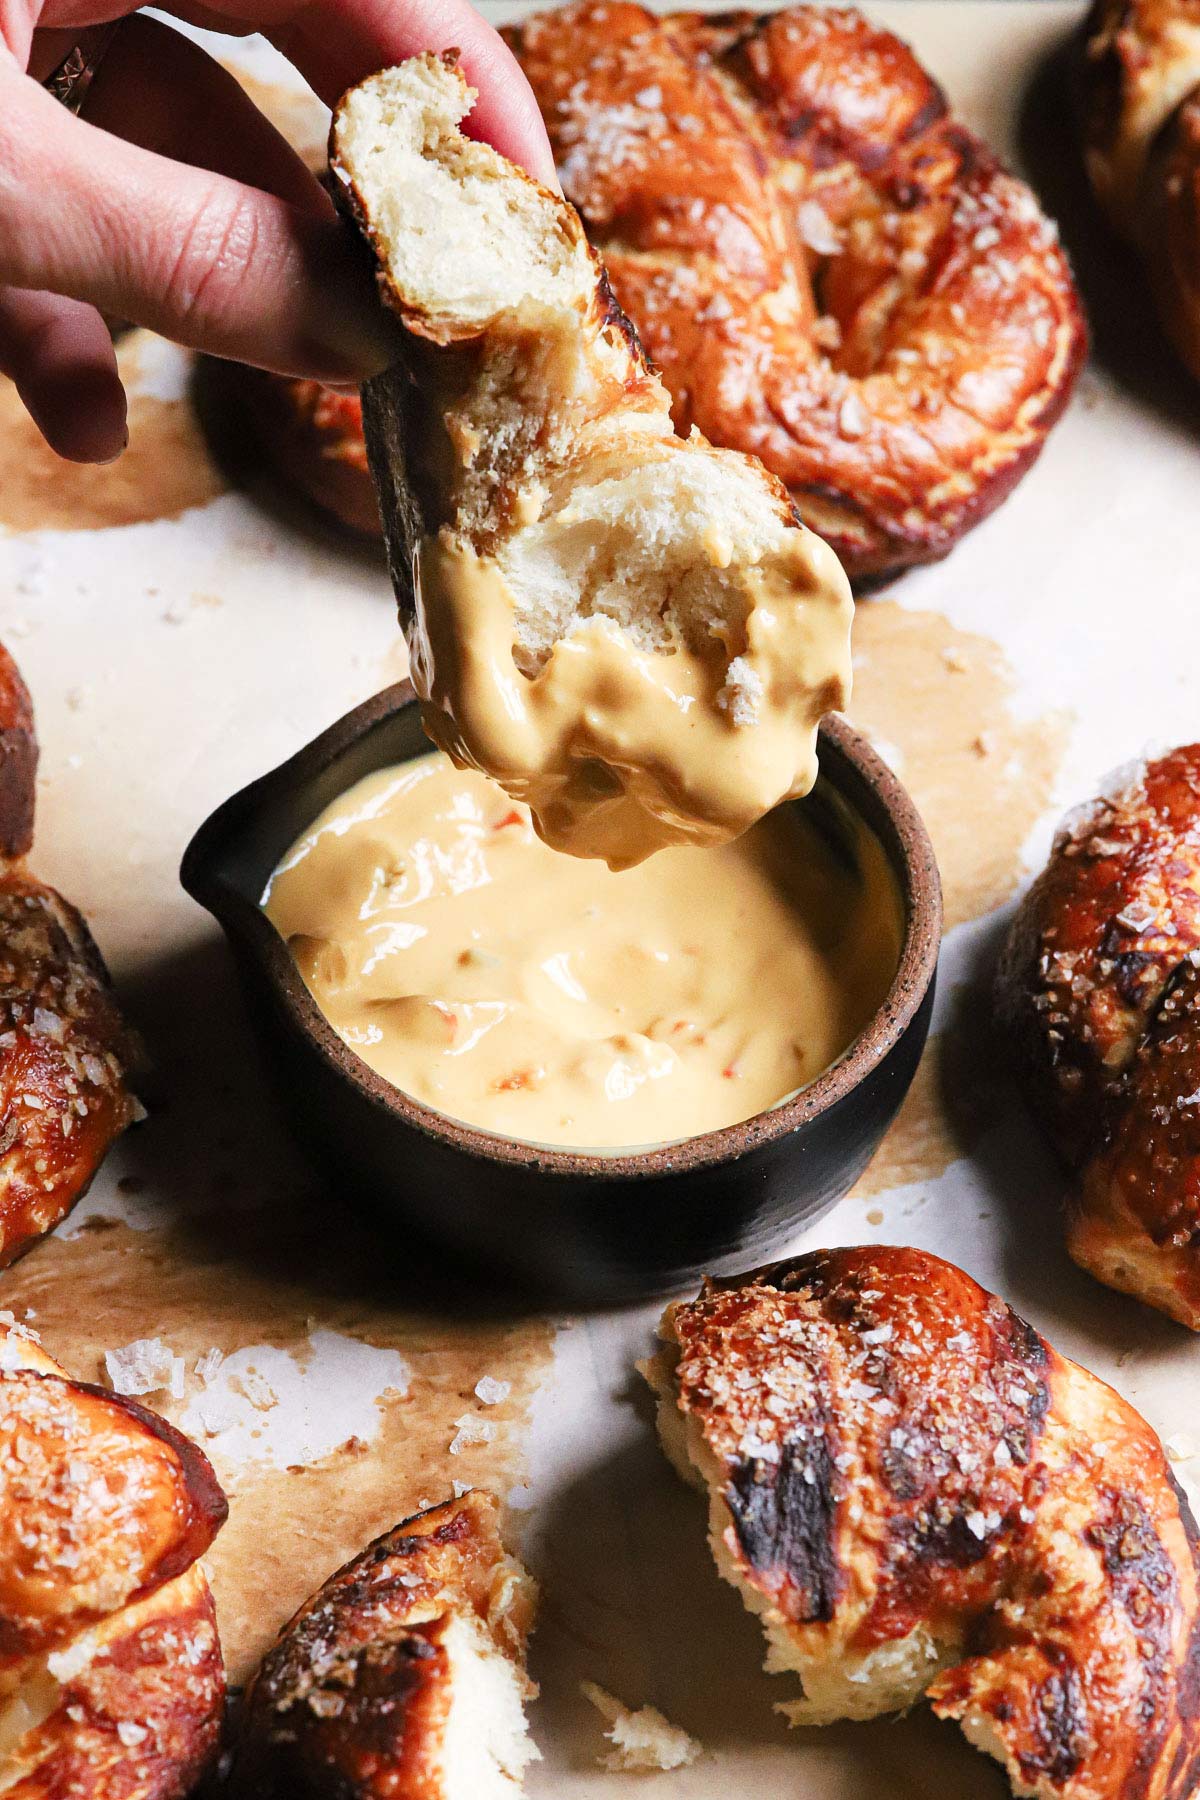 A piece of soft pretzel being dipped into a beer cheese sauce